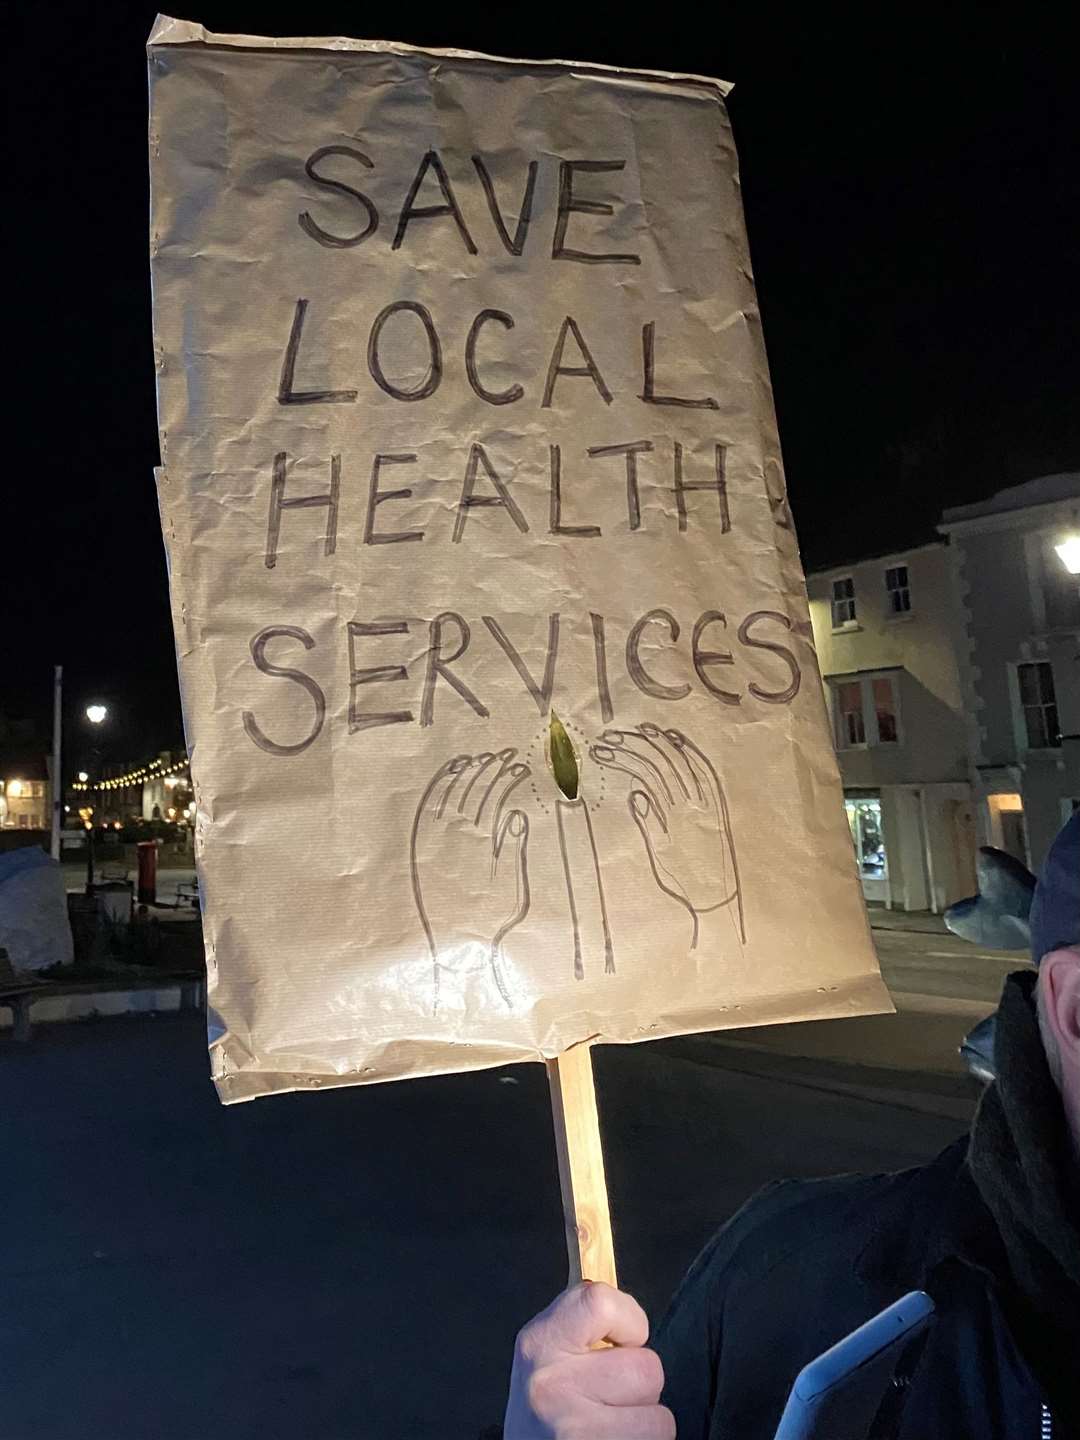 The vigil and protest in Deal in February. Photo: Office of Natalie Elphicke MP